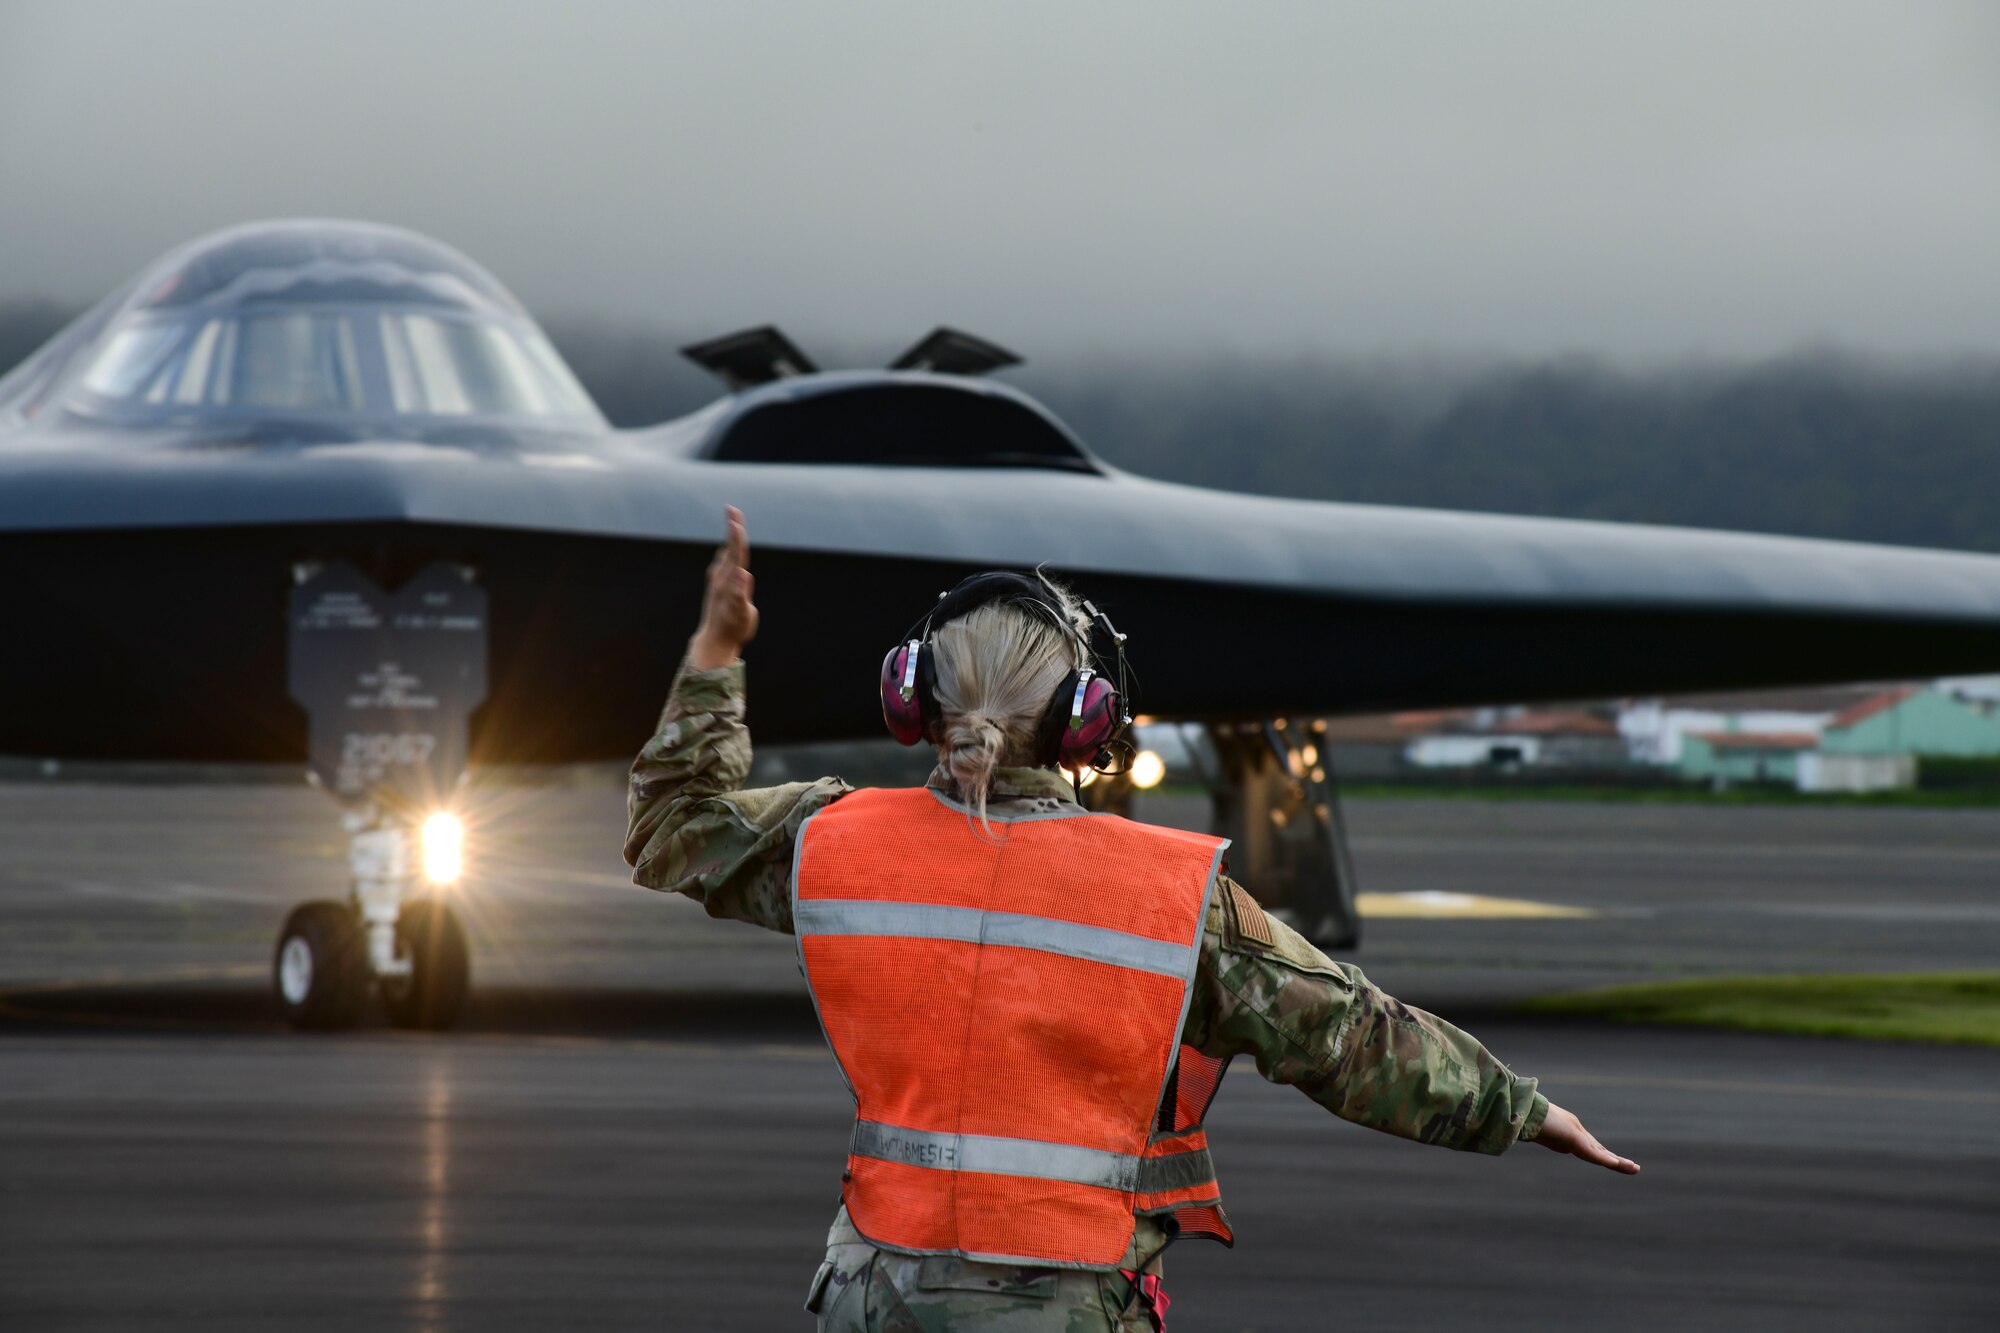 Three B-2 Spirit stealth bombers, assigned to Whiteman Air Force Base, Missouri, depart Lajes Field, Azores, March 16, 2021. The B-2s refueled at Lajes prior to supporting bomber task force missions in the Arctic region.